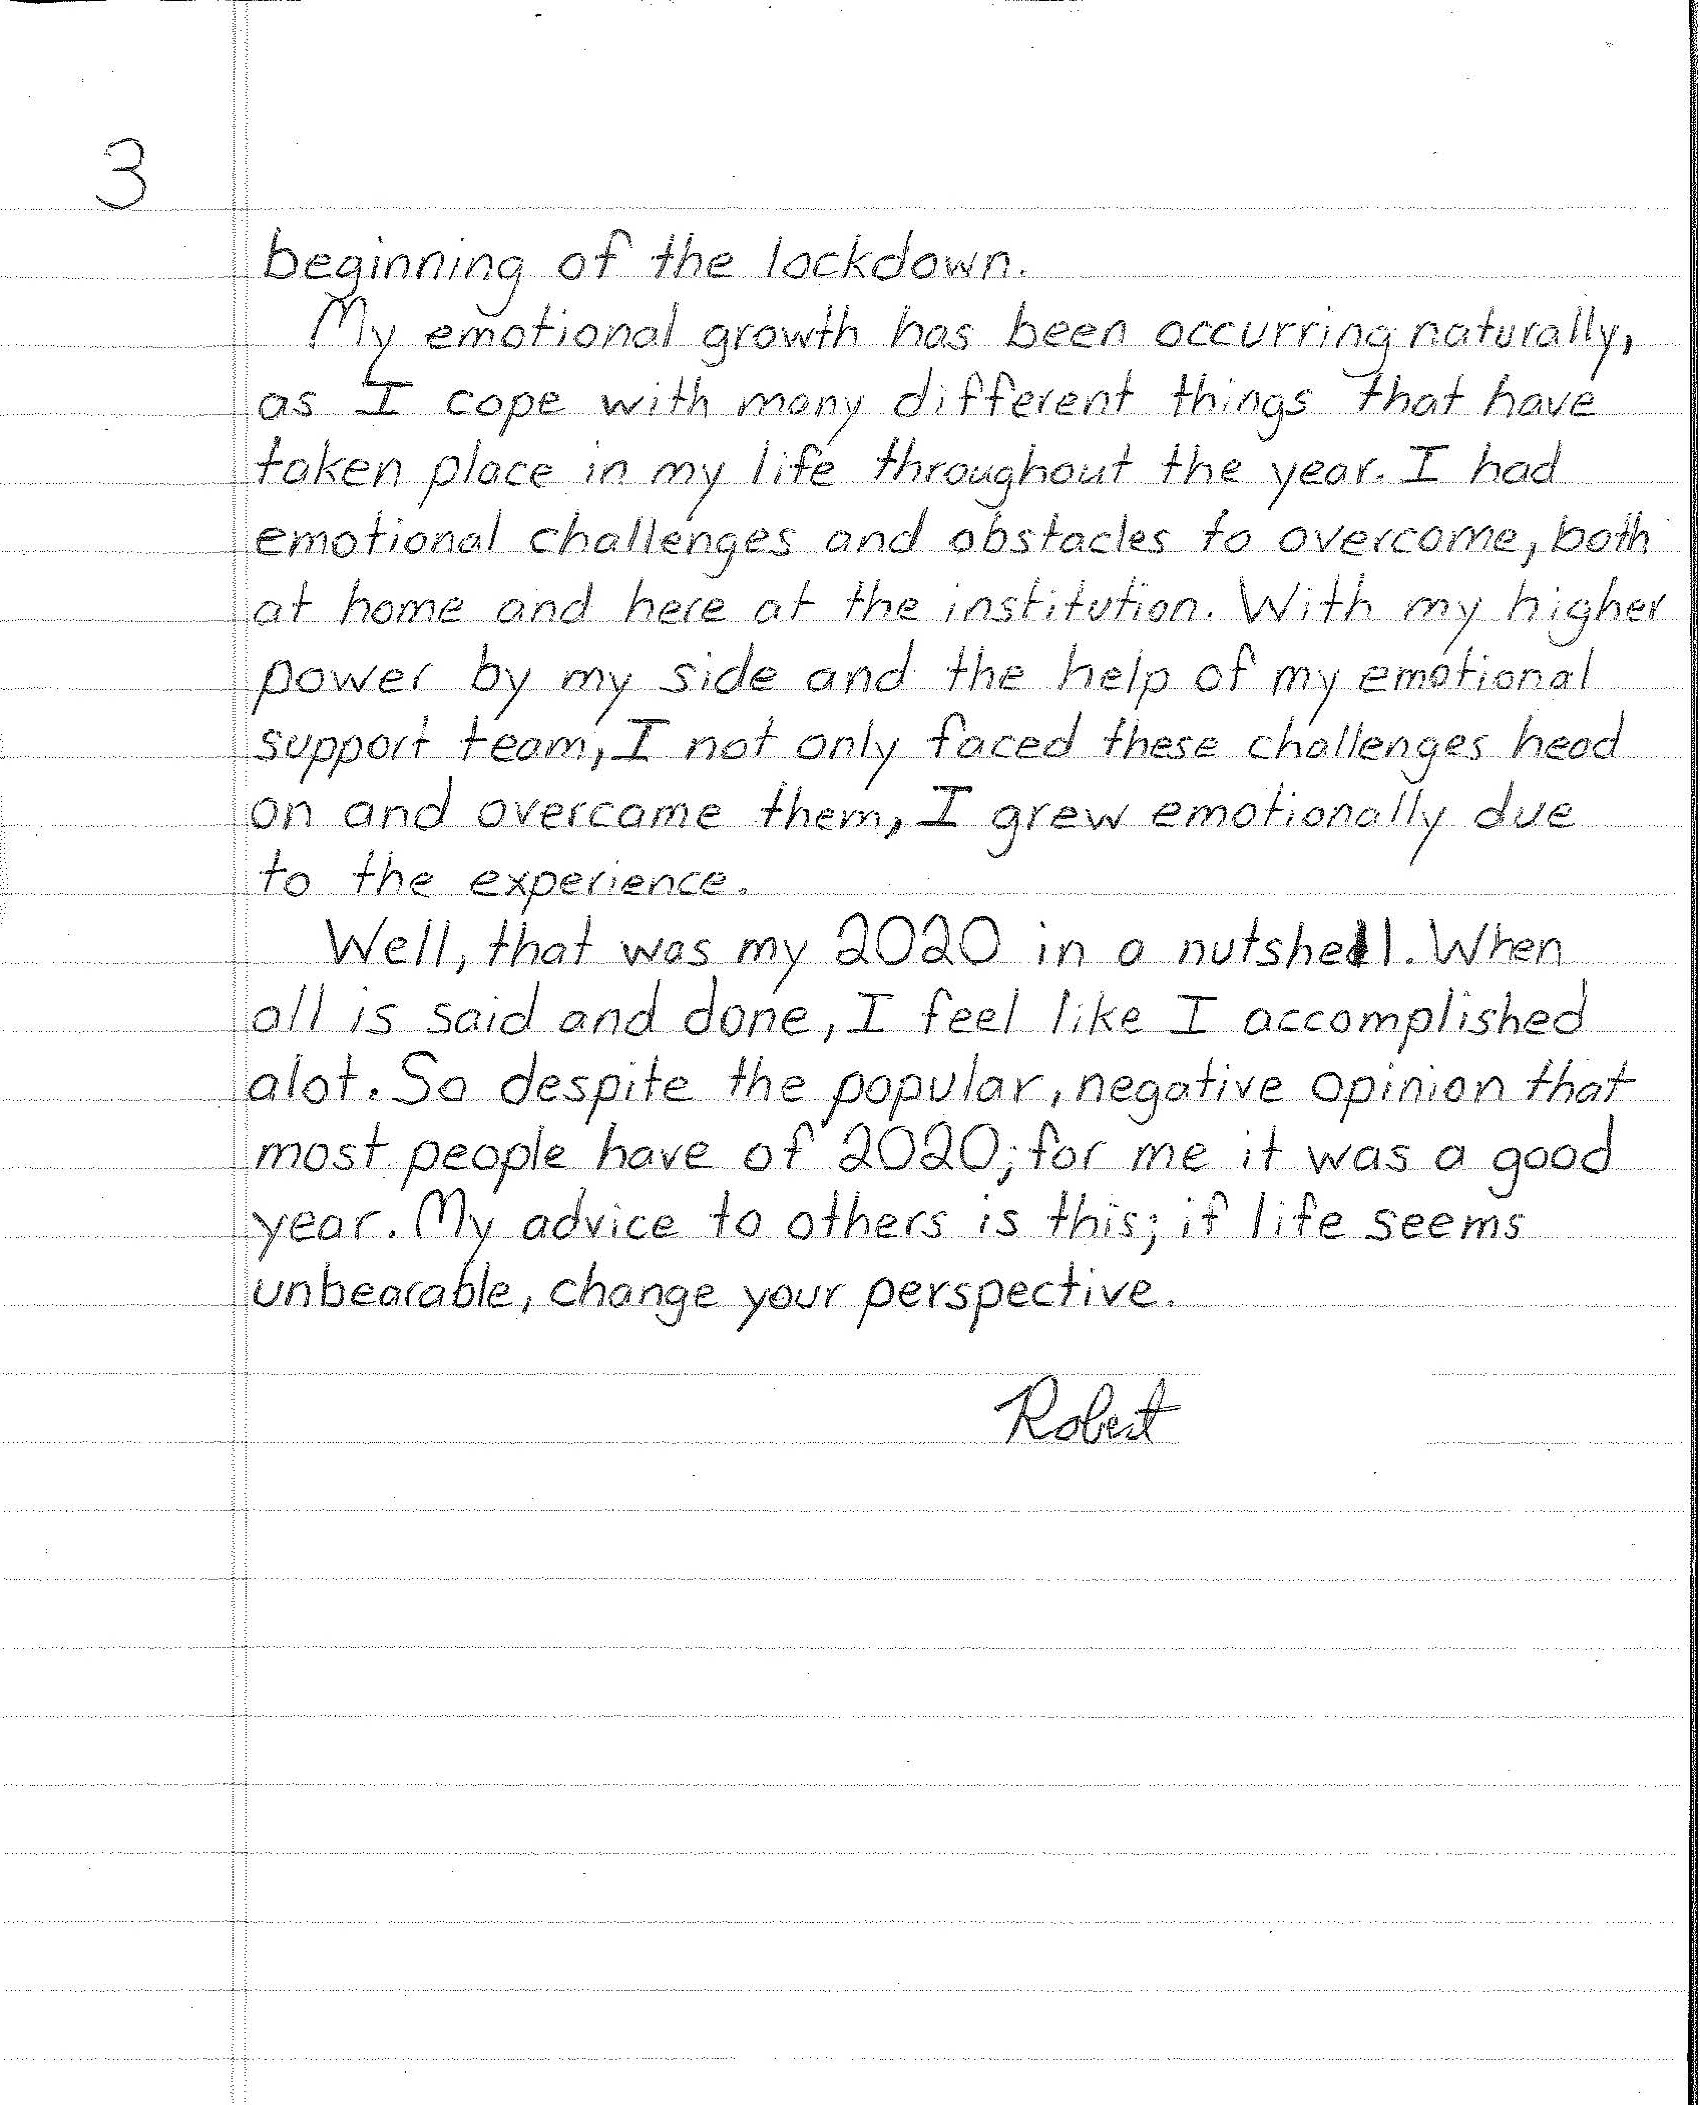 The third page of the winning essay